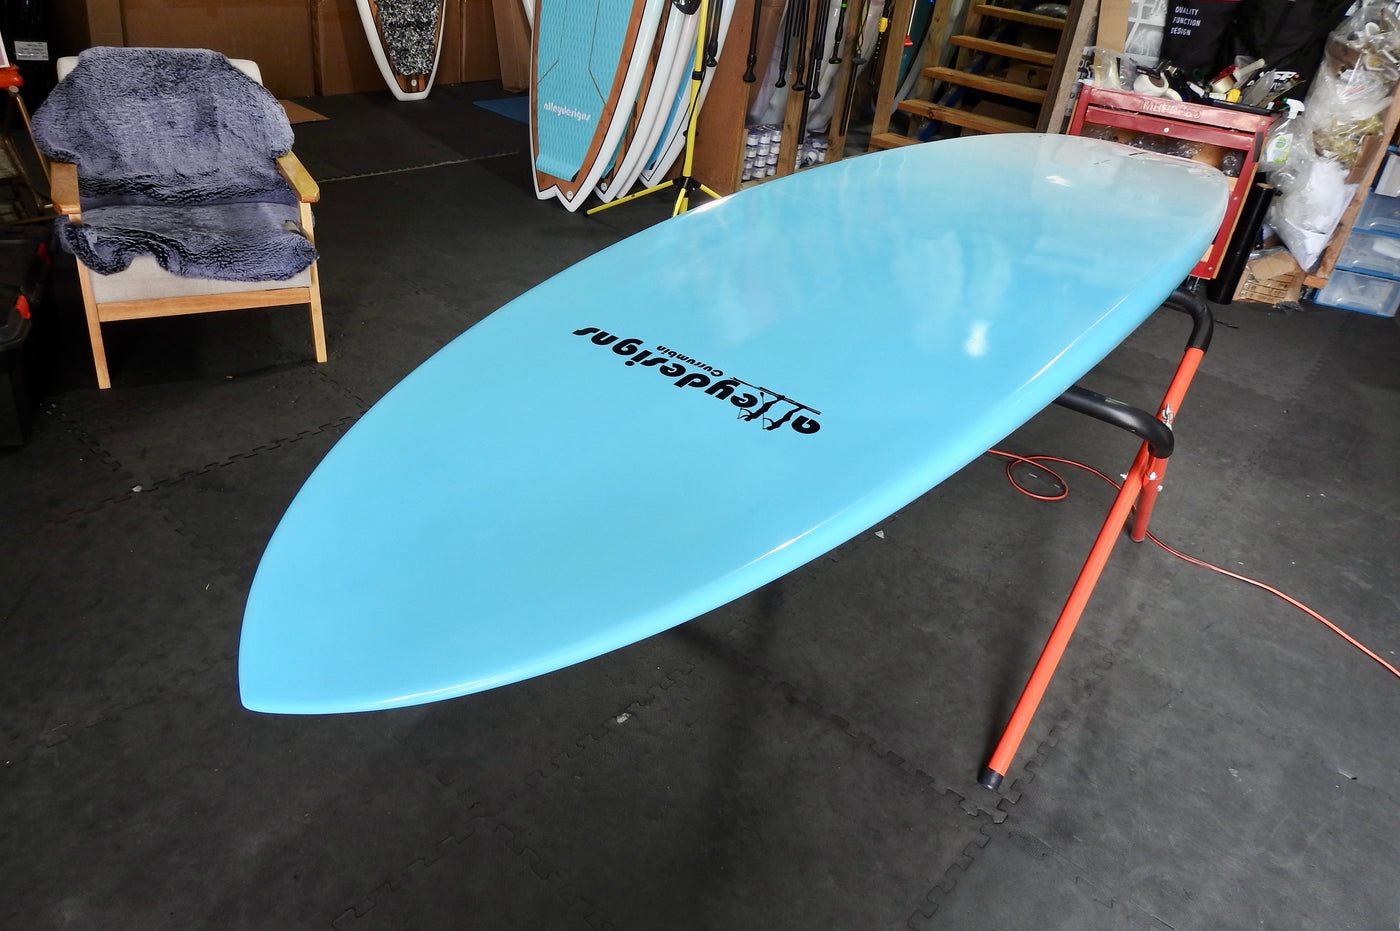 10'6" x 32" Bamboo Performance Teal Rails Alleydesigns SUP 11kg - Alleydesigns  Pty Ltd                                             ABN: 44165571264